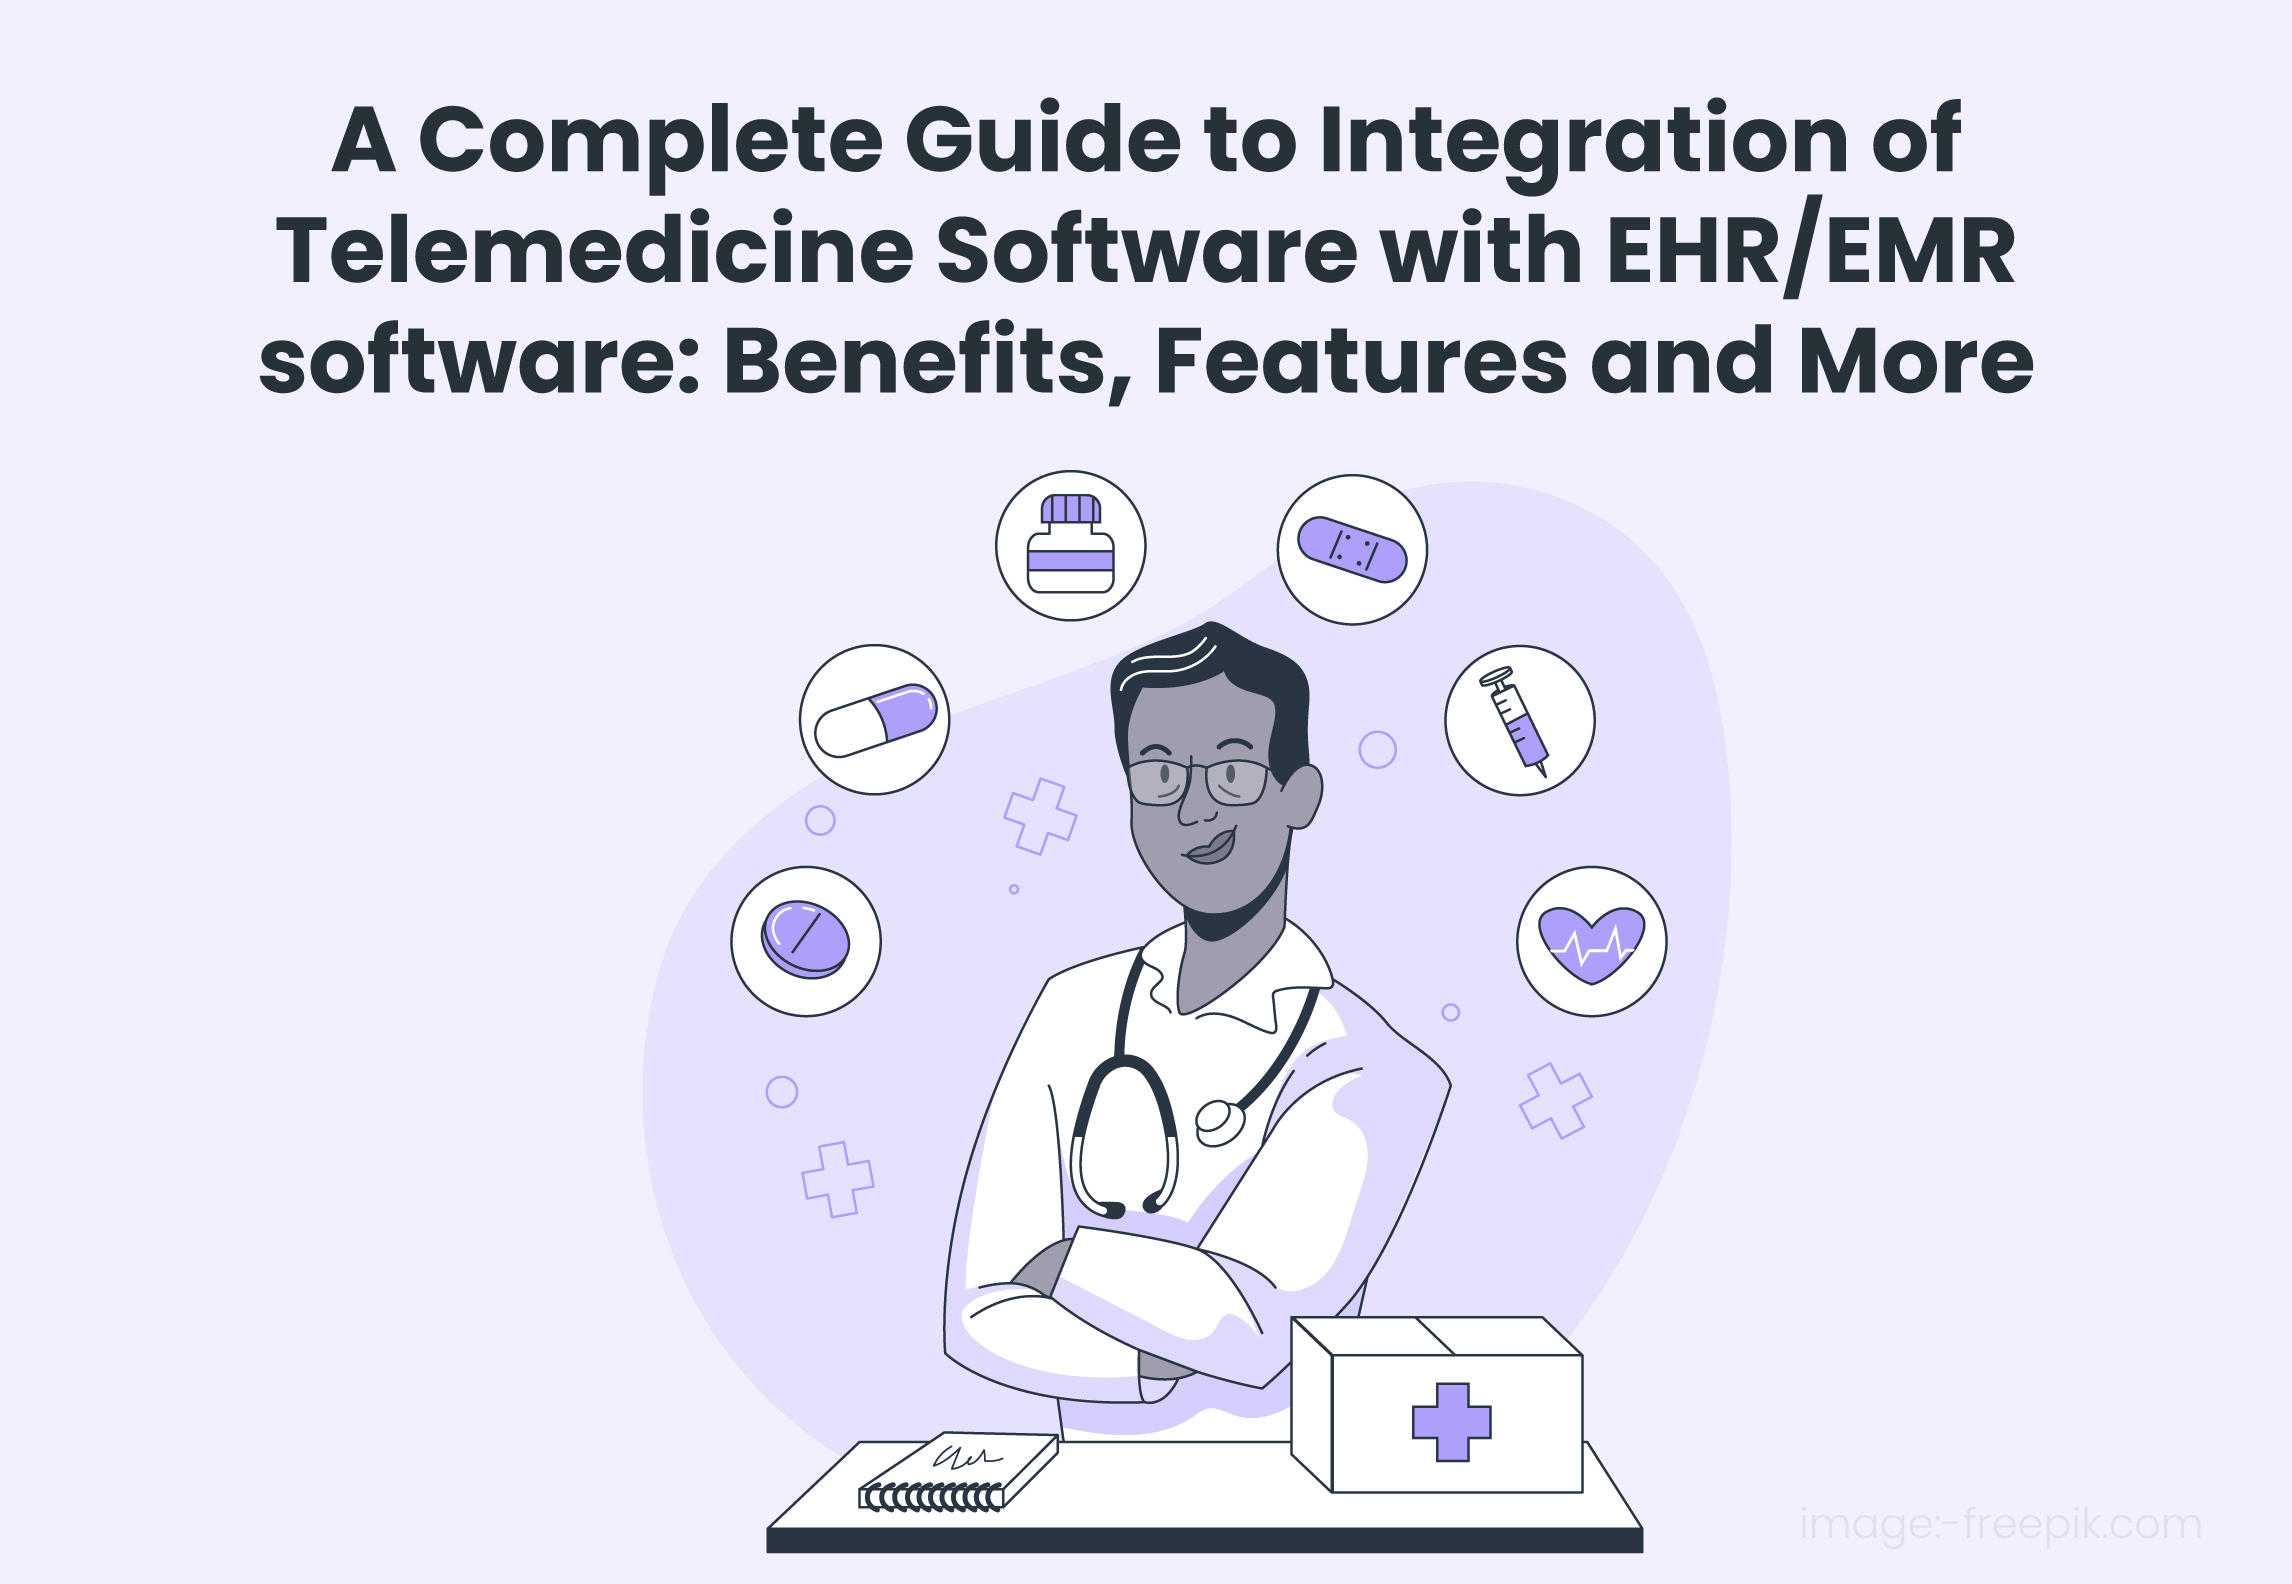 A Complete Guide to Integration of Telemedicine Software with EHR EMR software Benefits Features and More - Knovator Technologies